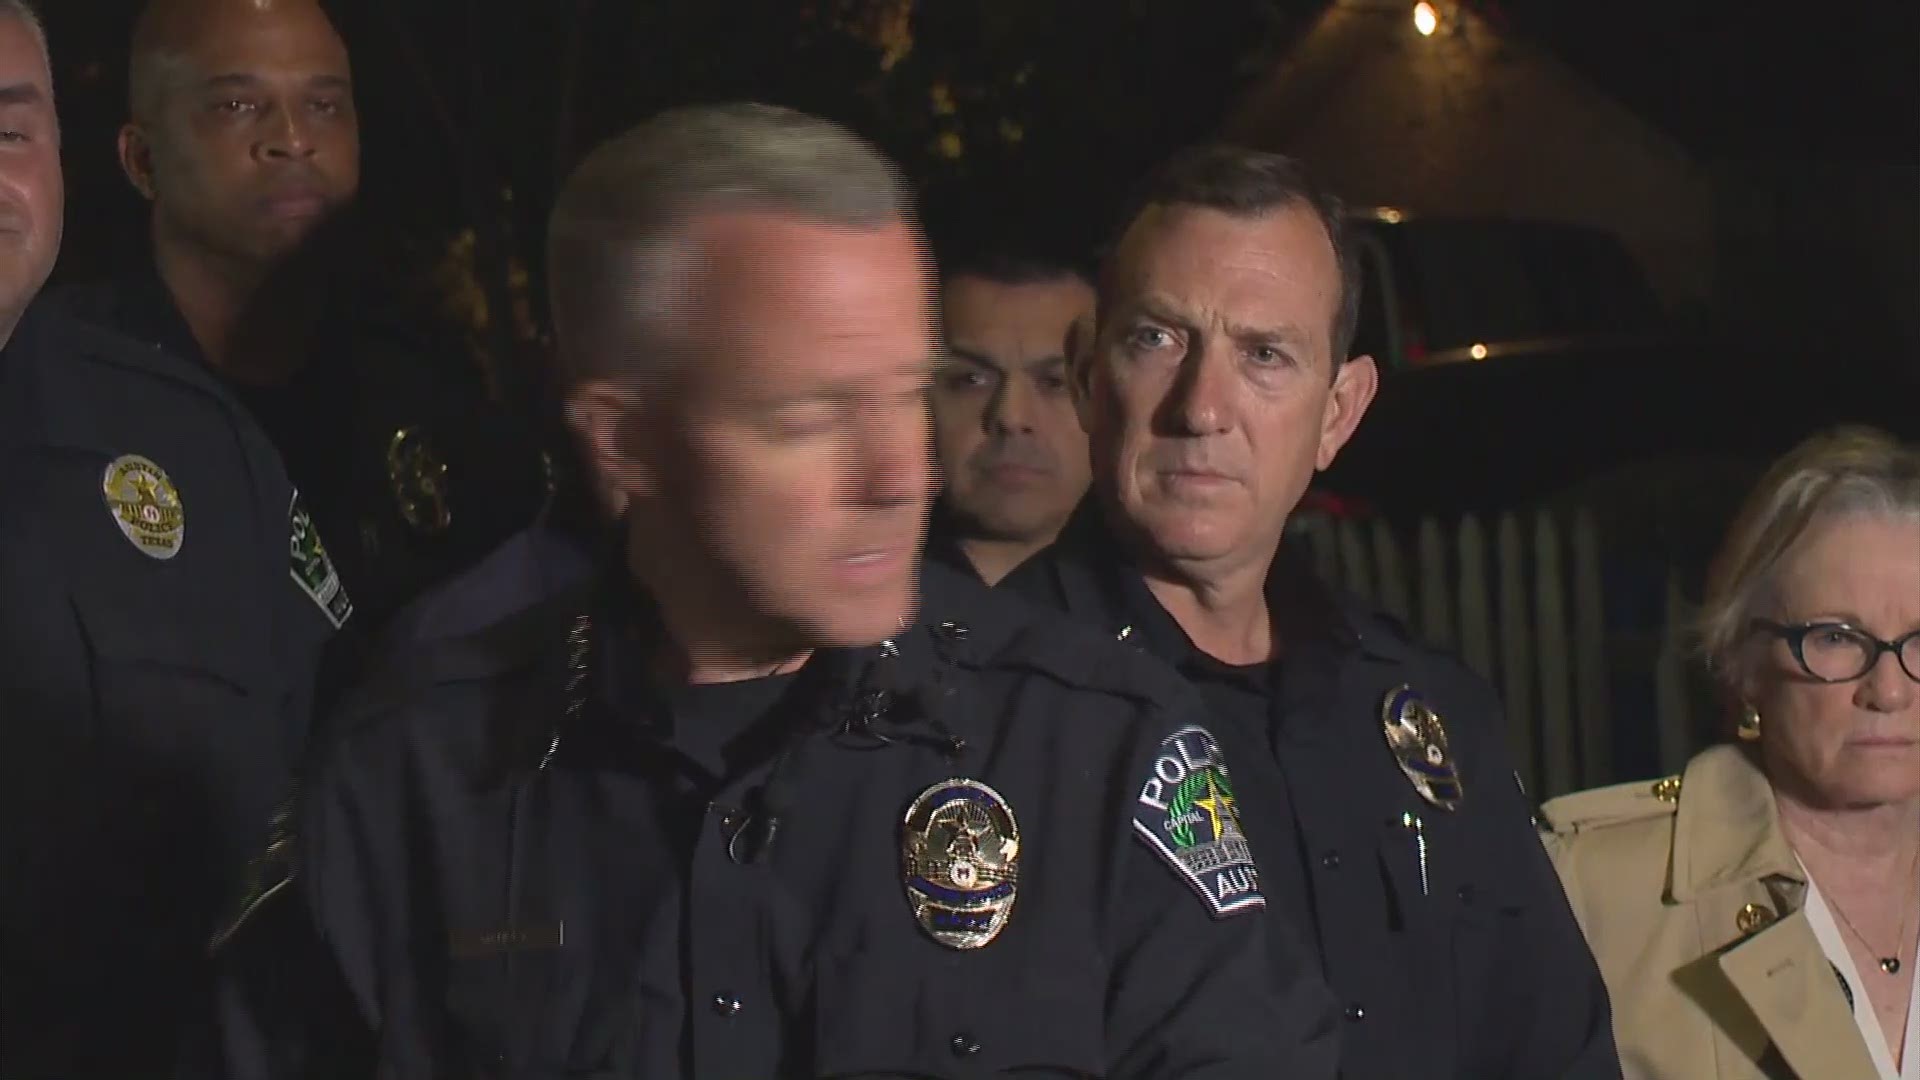 Interim Chief Manley update on officer-involved shooting in Southeast Austin